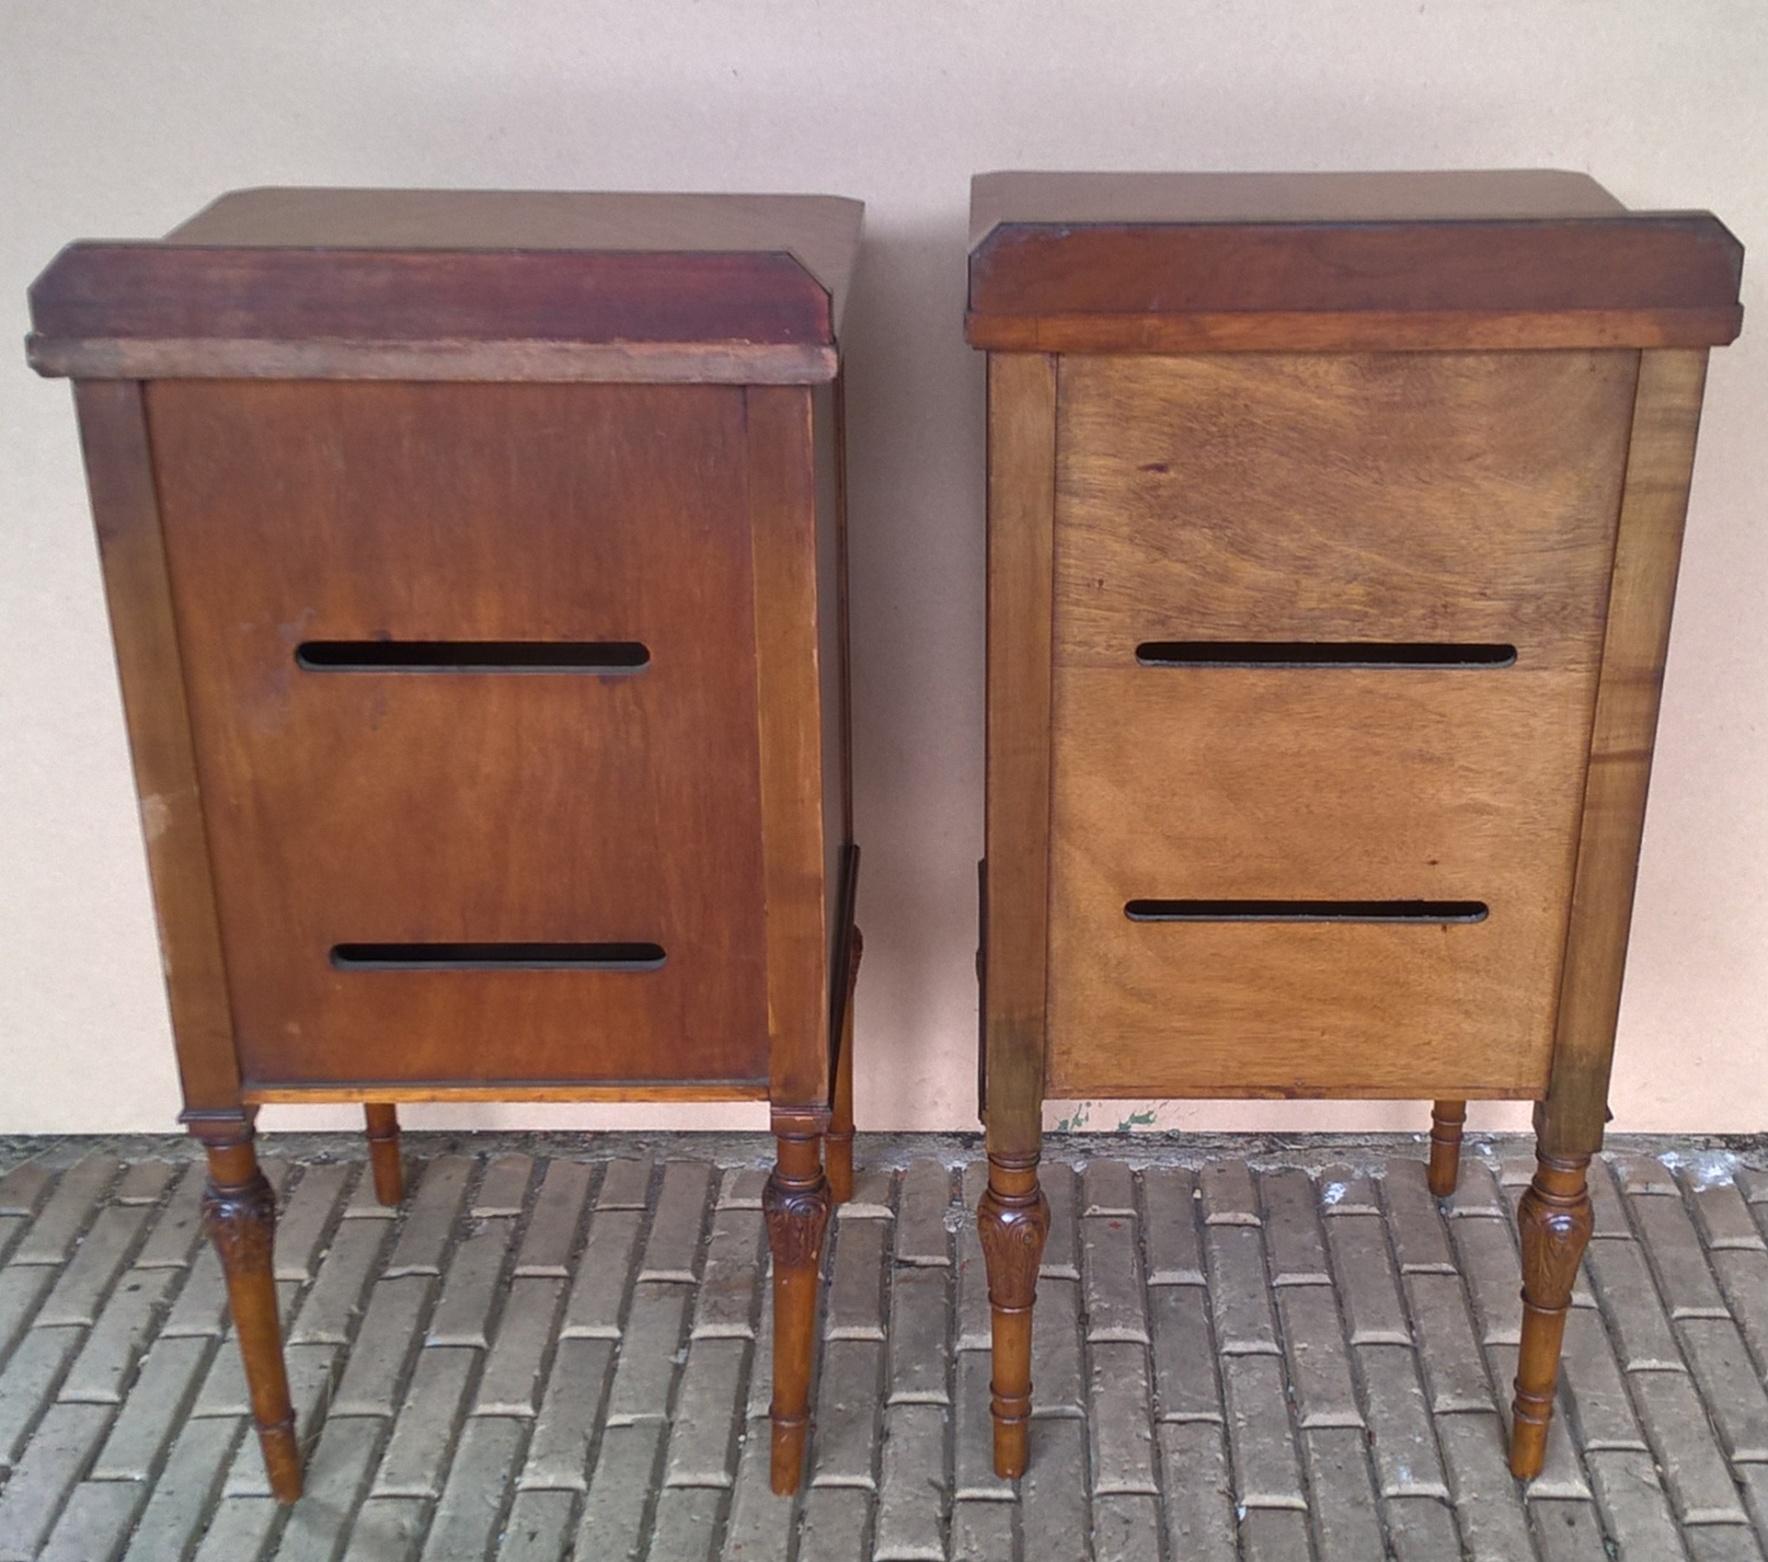 20th Century Near Matched Pair of Edwardian Satinwood Bedside Cabinets For Sale